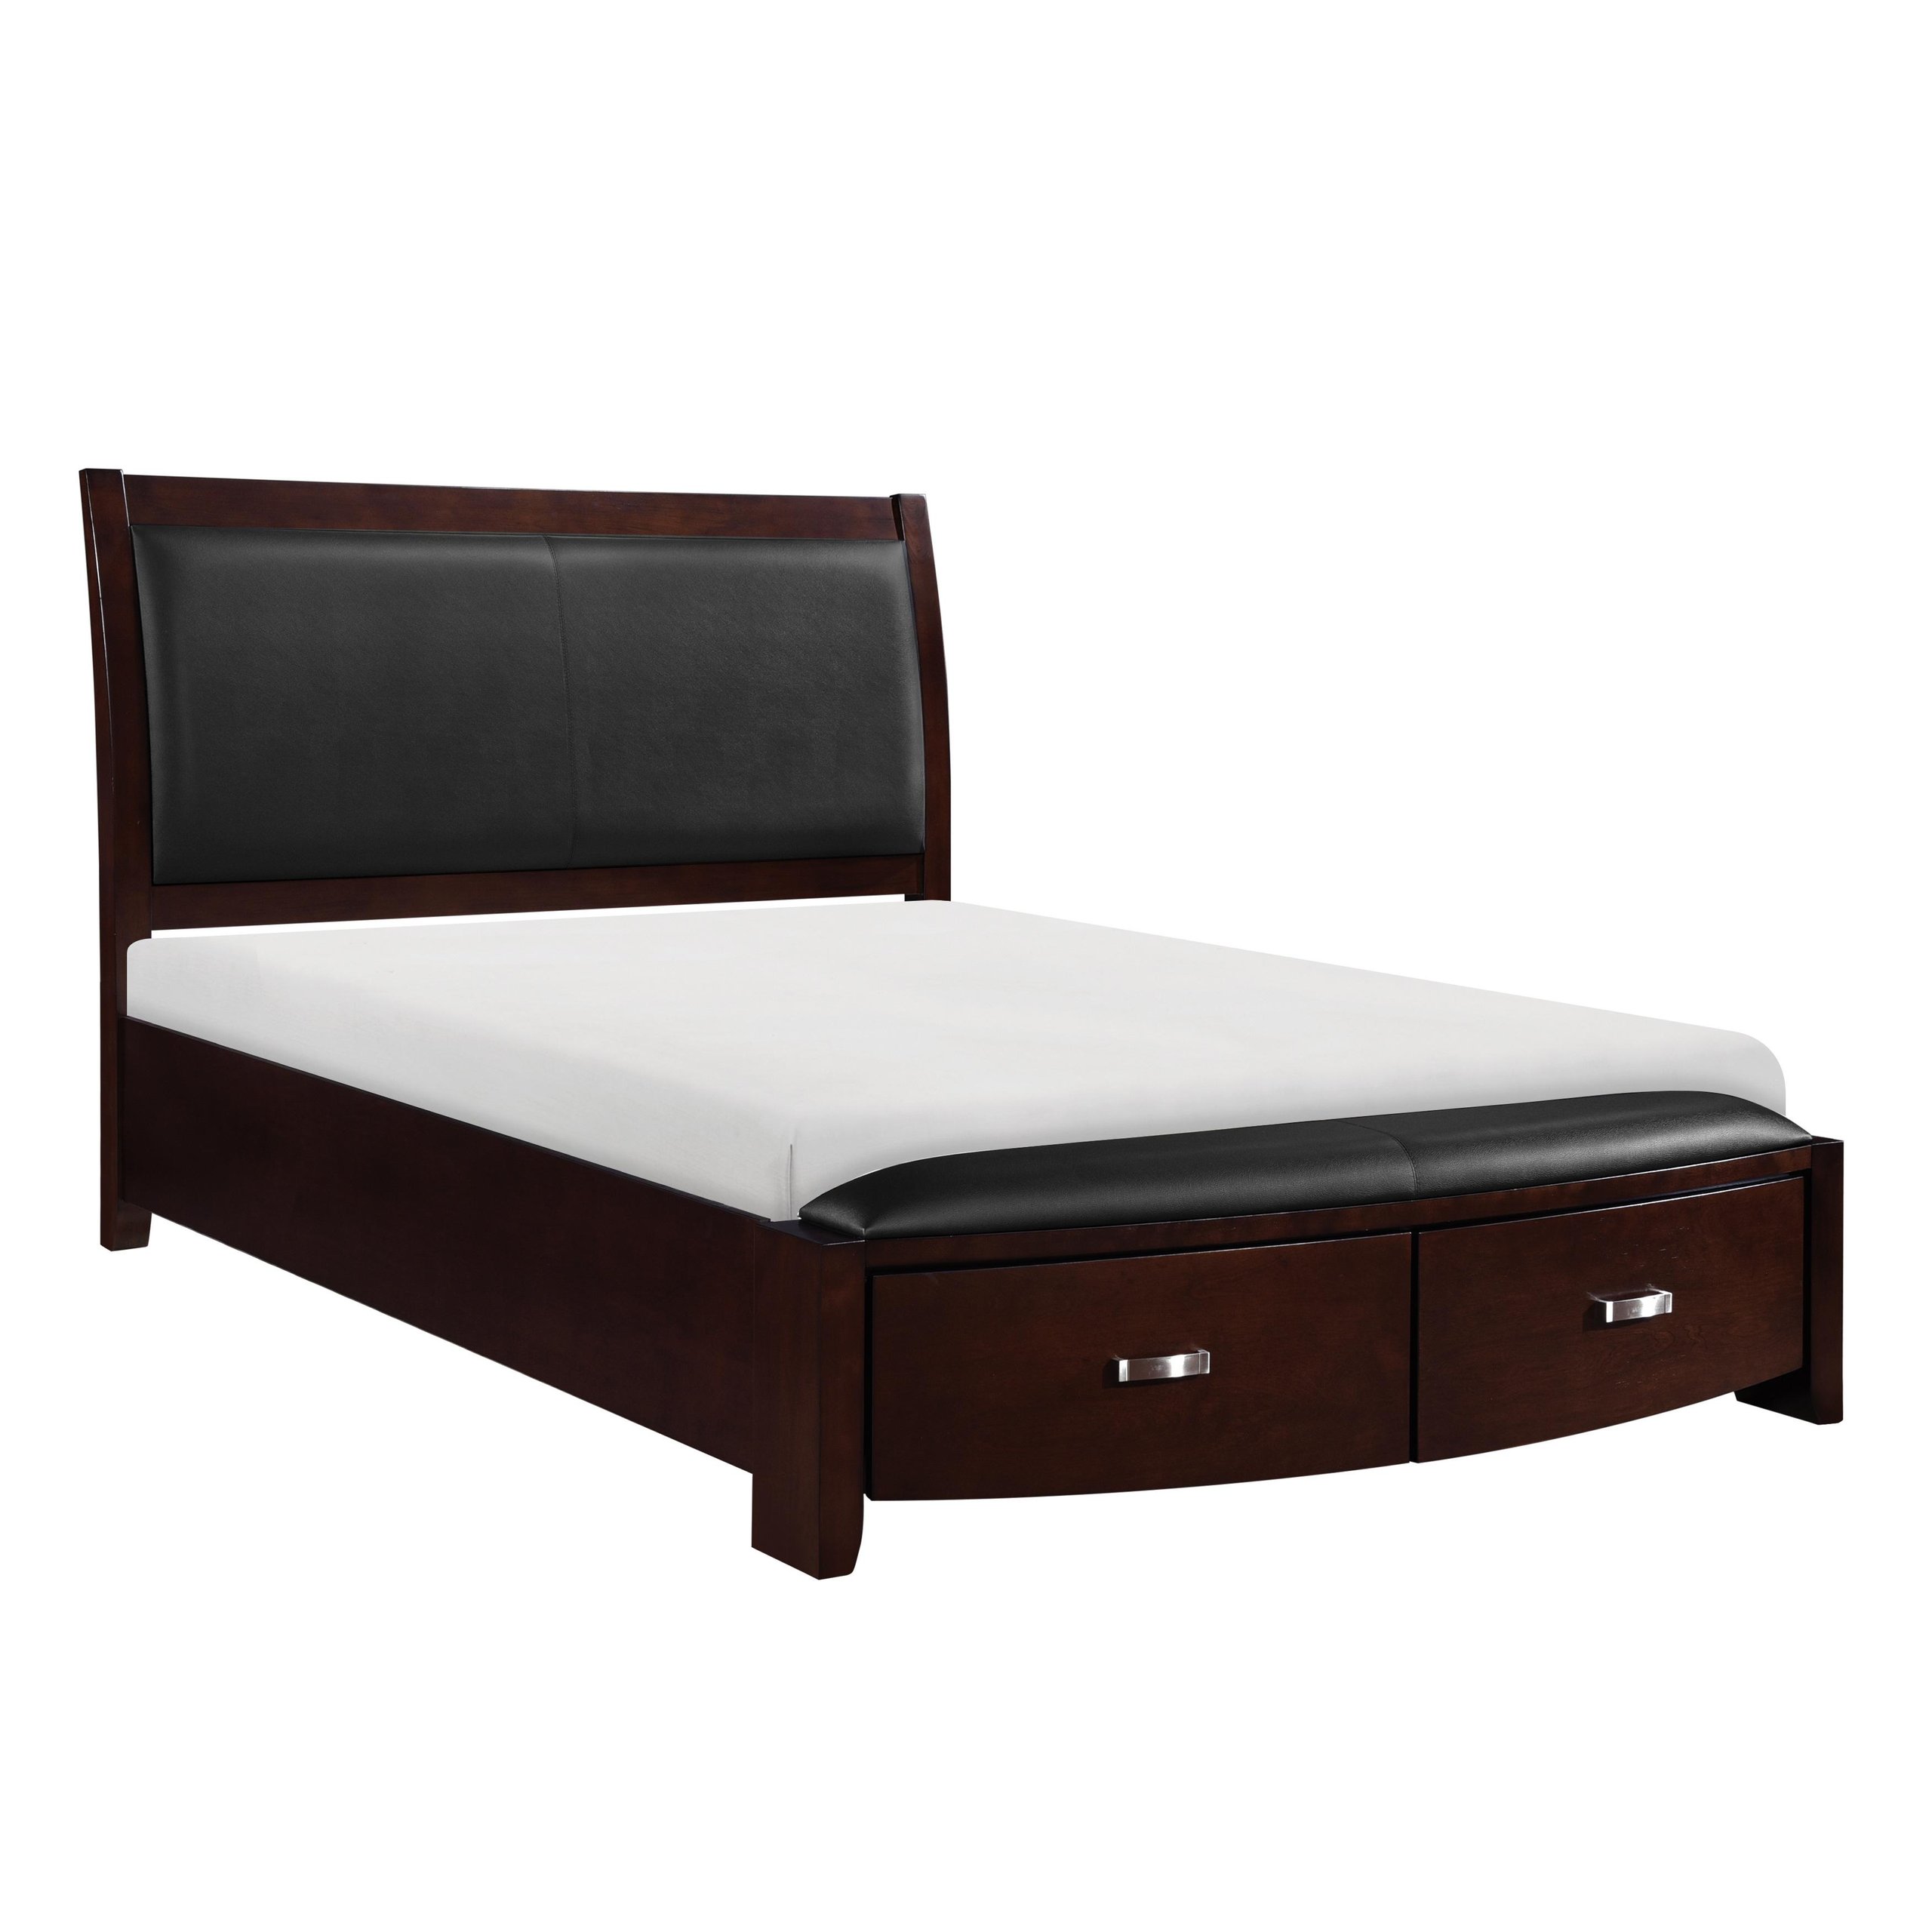 Contemporary Dark Cherry Wood Cal Bed Homelegance 1737knc 1ck Lyric Buy Online On Ny